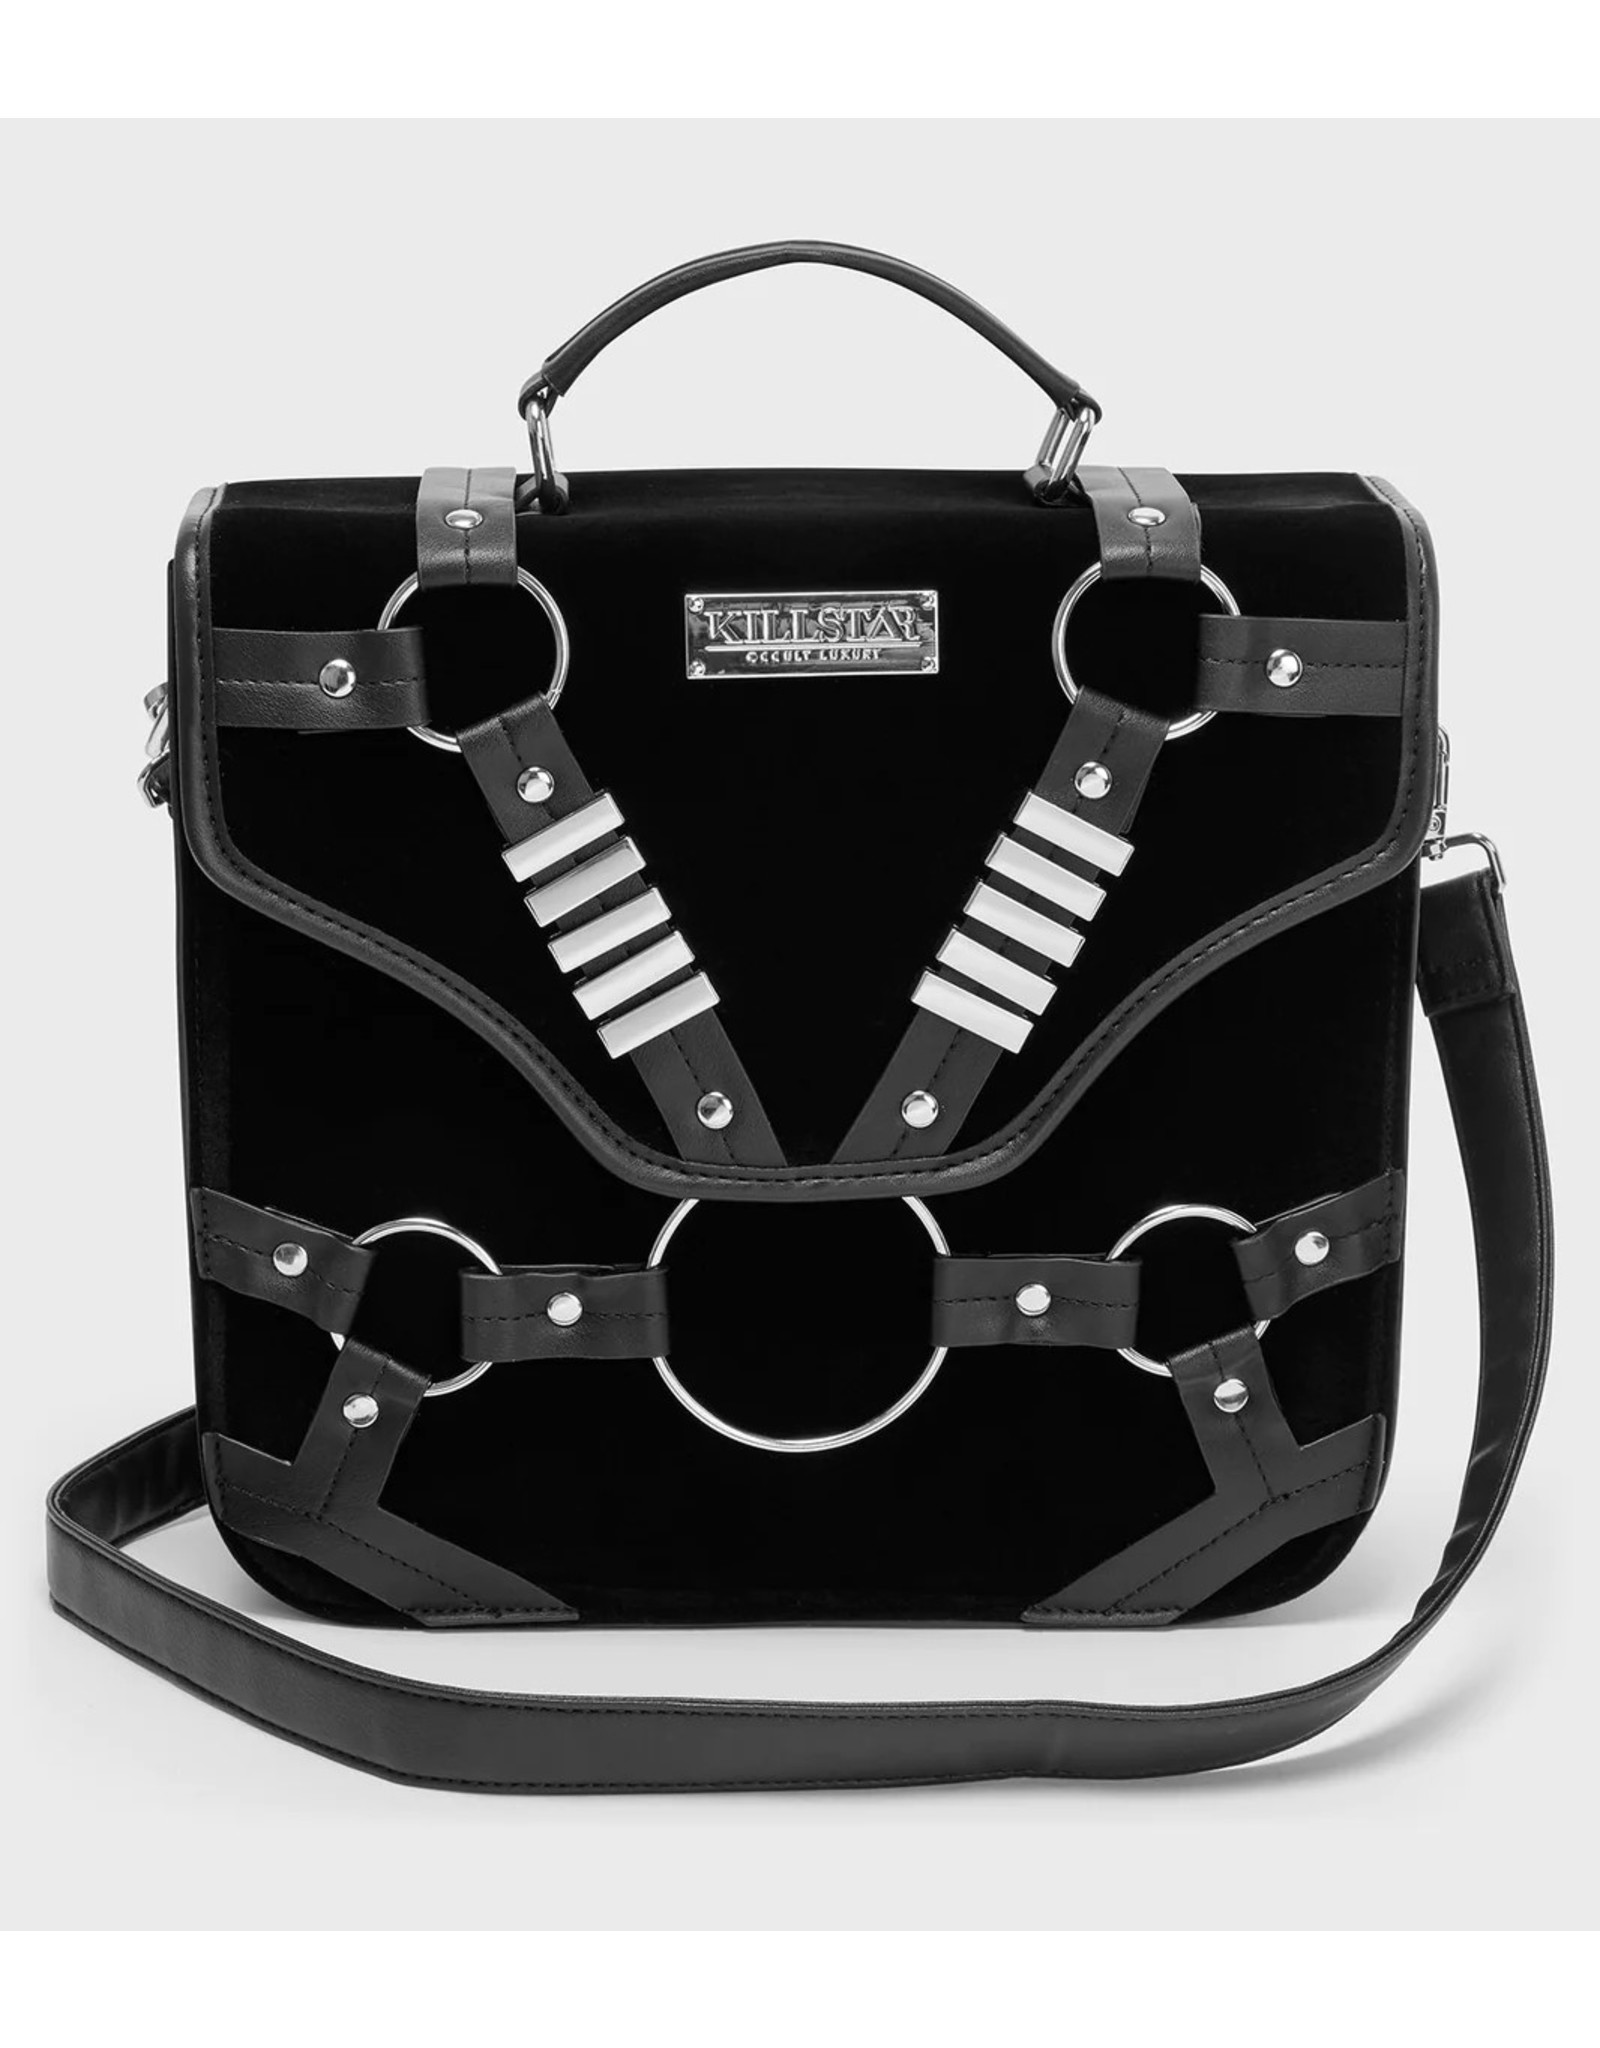 Killstar Gothic Bags Steampunk Bags - Killstar Witches of Wicked Messenger Bag